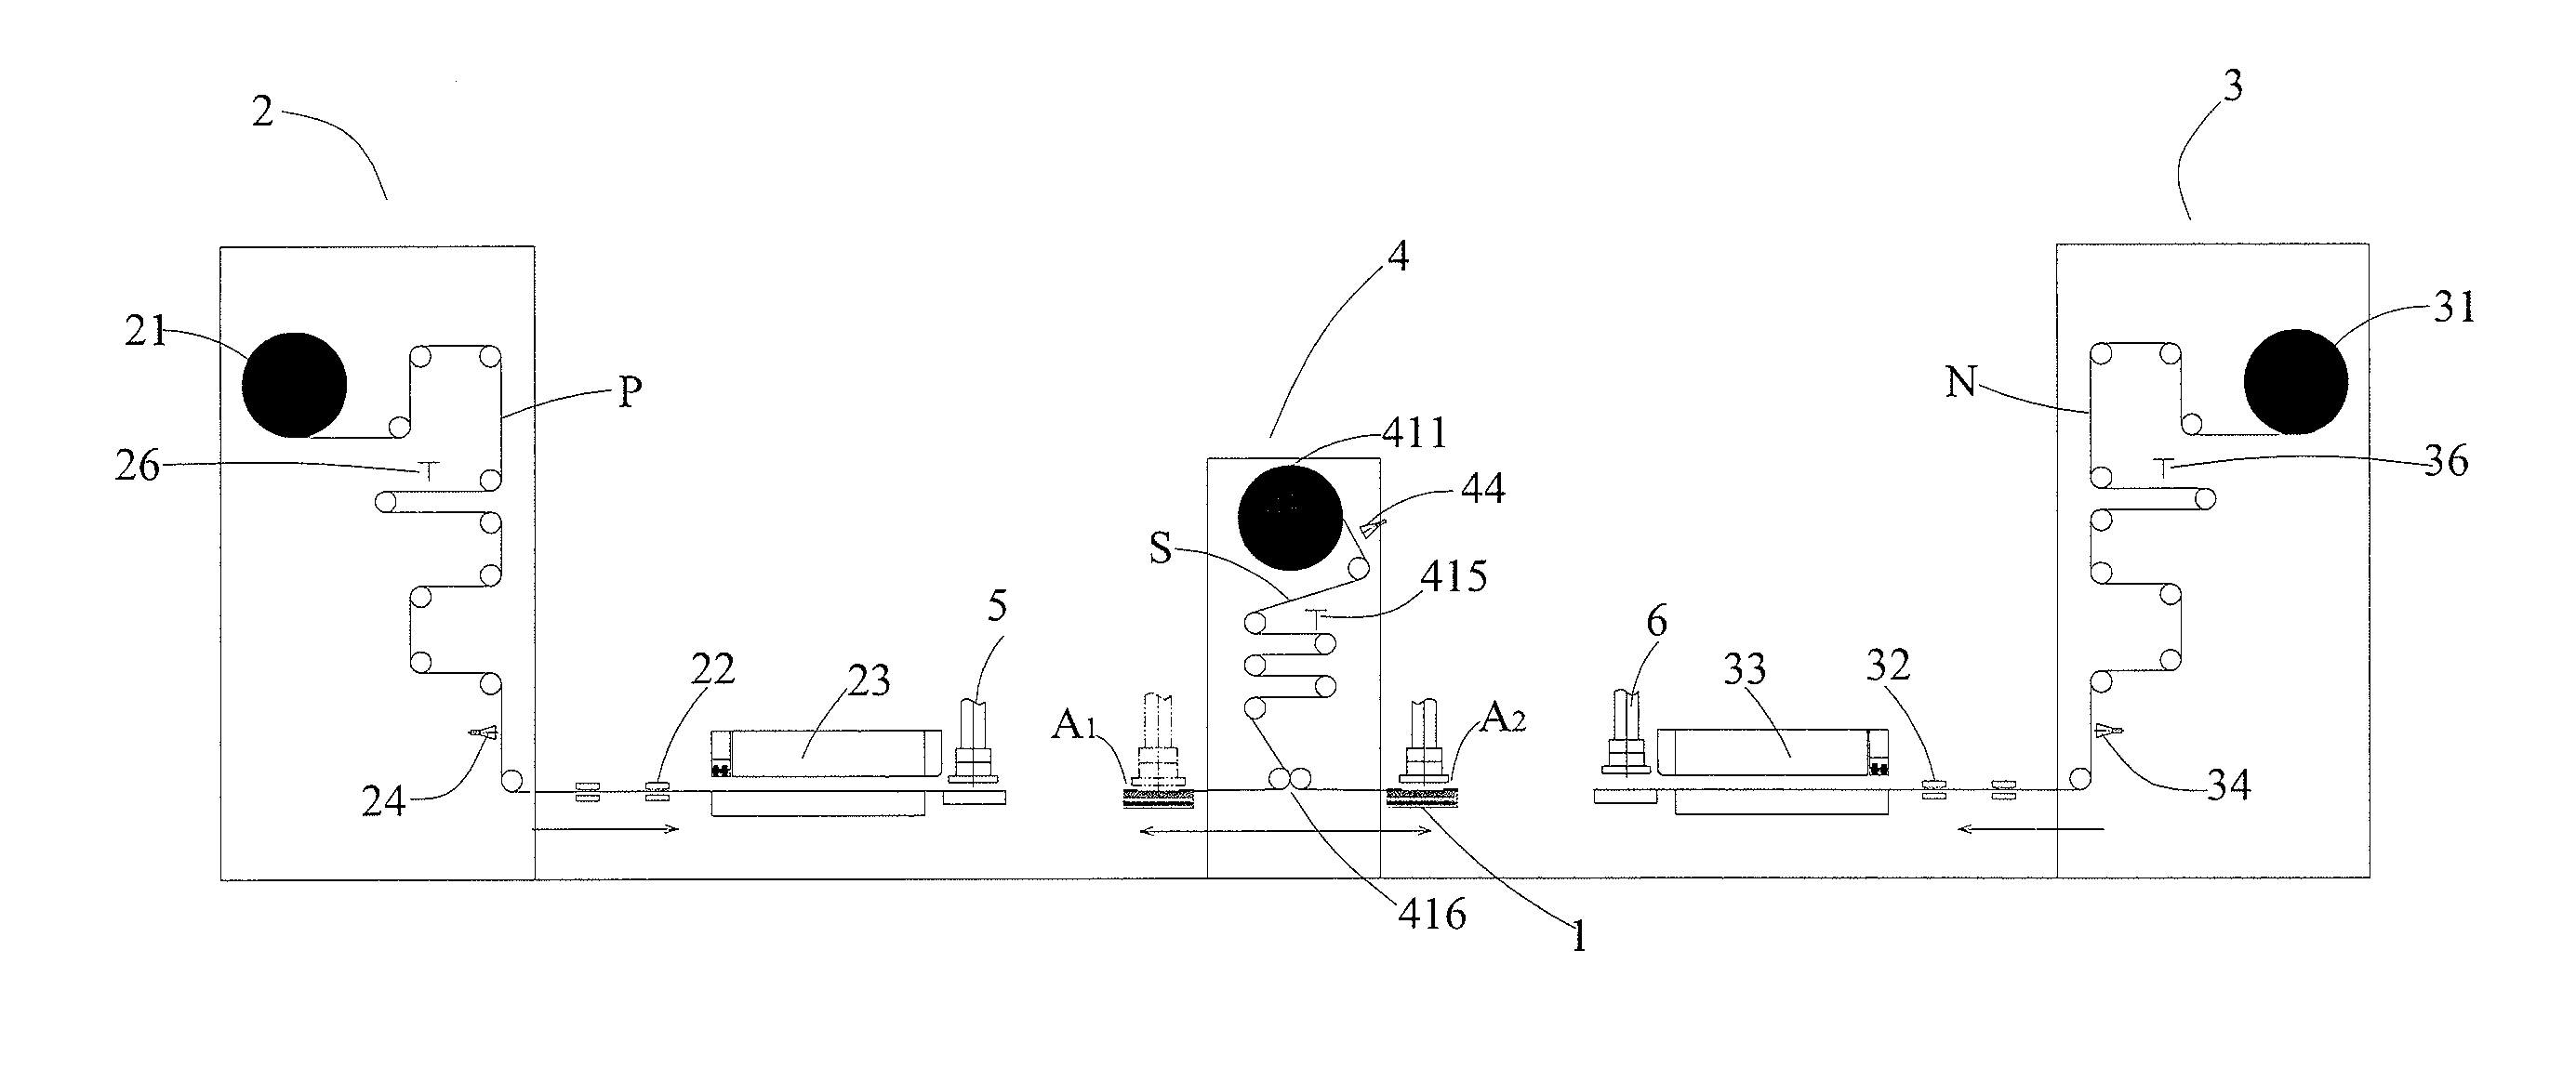 Laminated cell preparation device